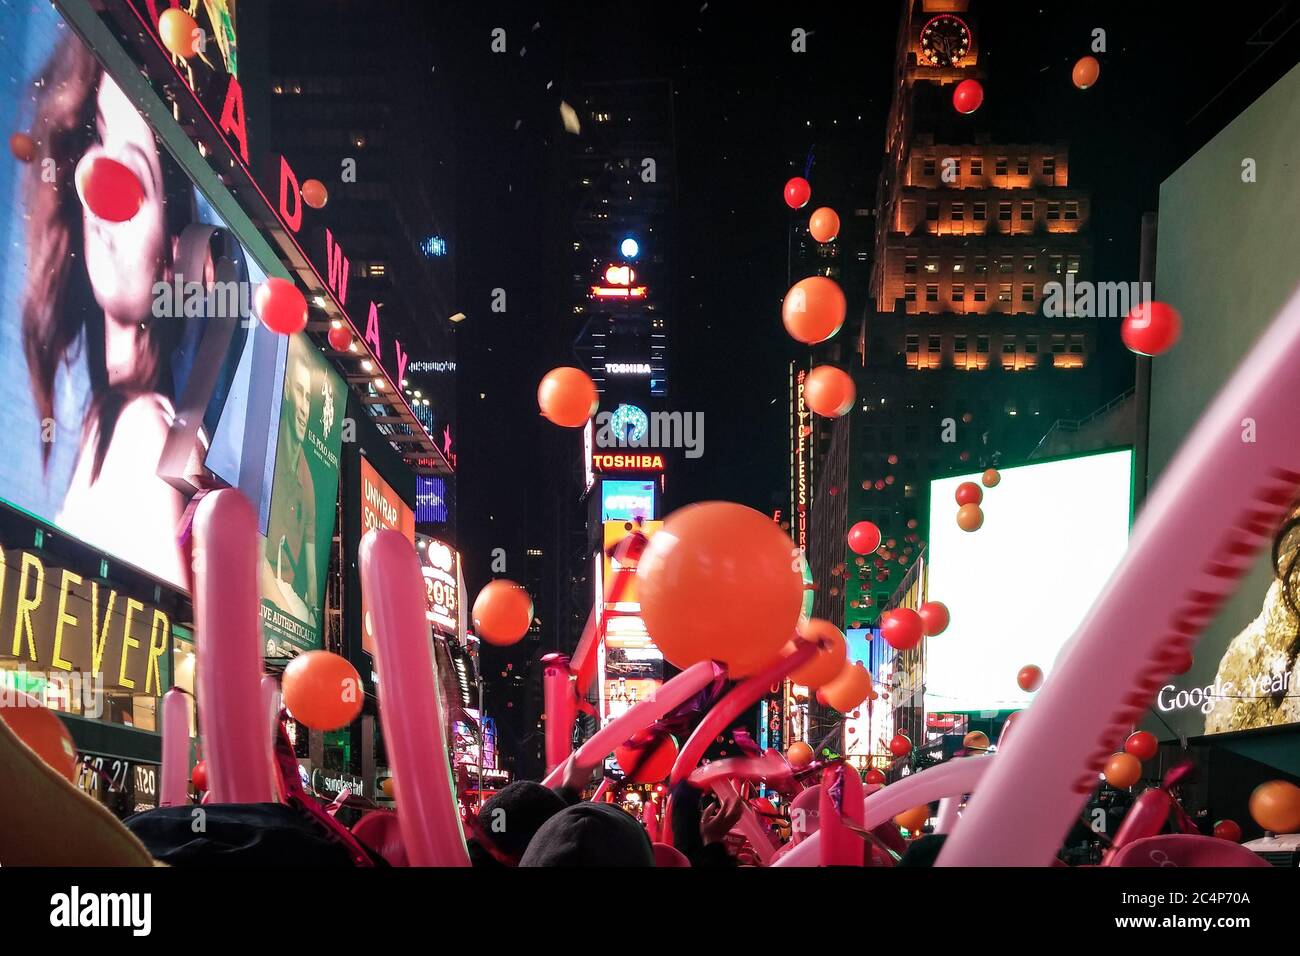 Manhattan, New York, United States of America - The Times Square New Year's Eve celebration famous for Ball Drop. Cheering crowds with balloon sticks. Stock Photo